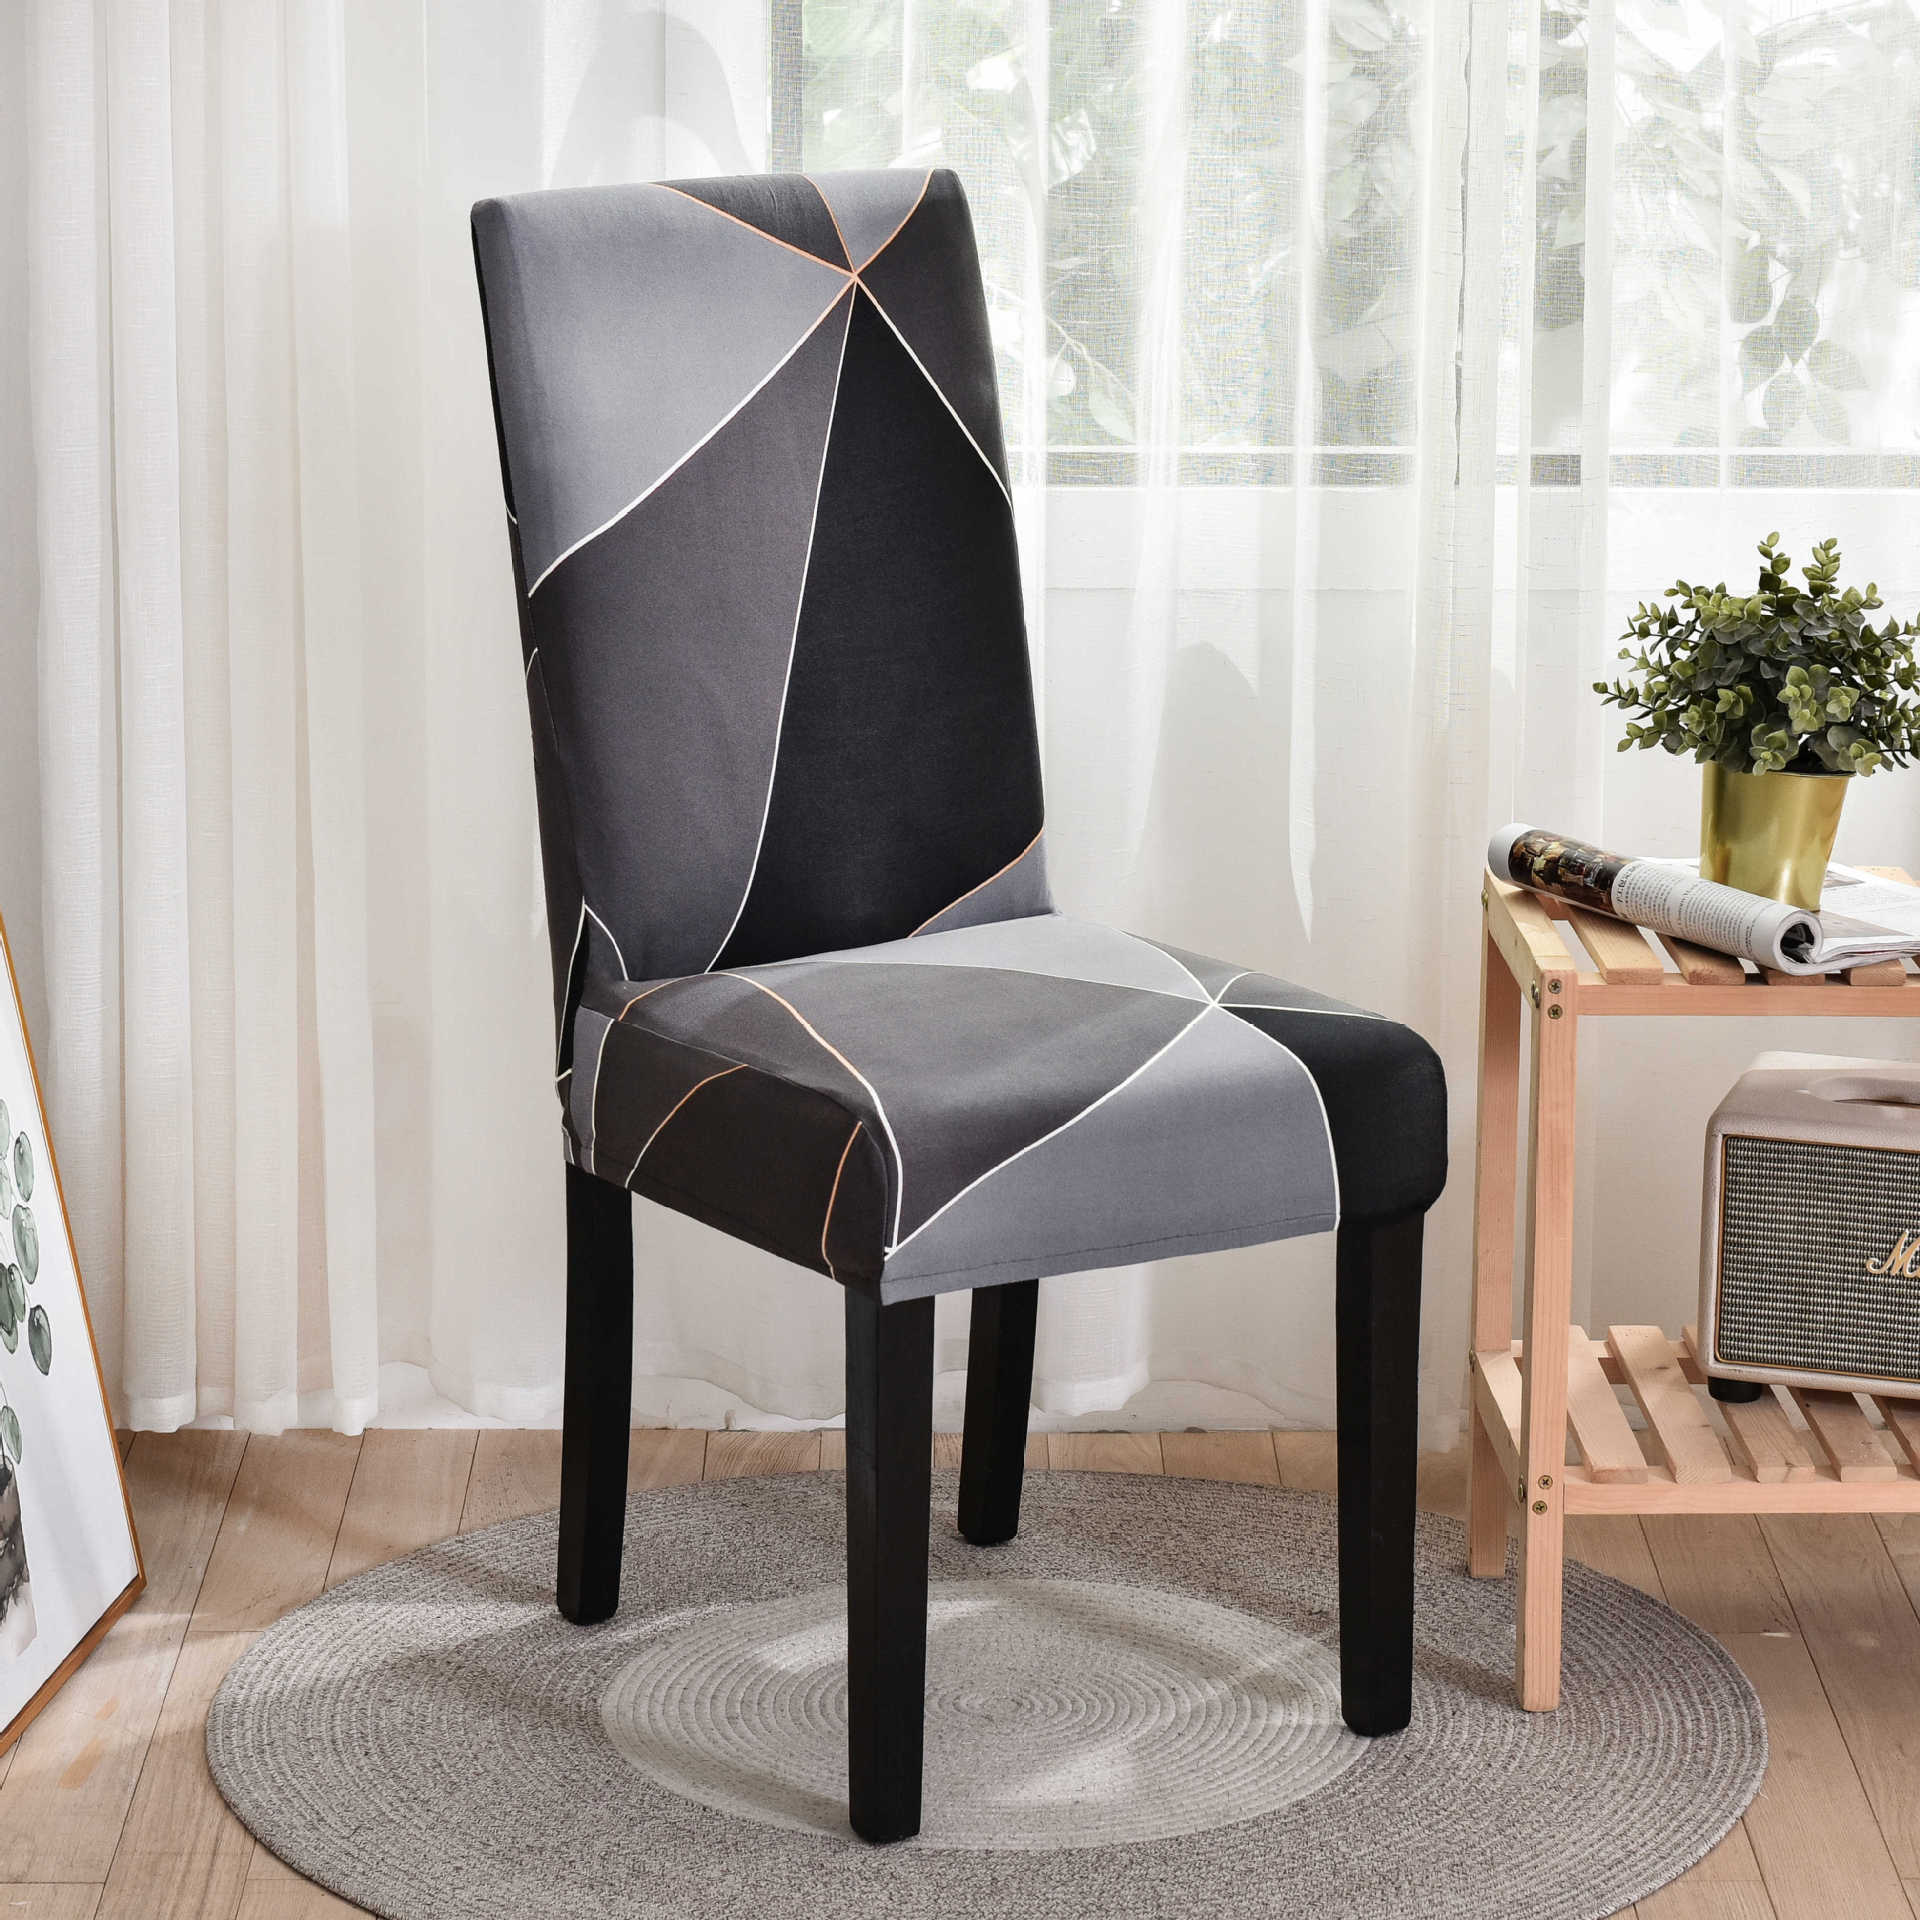 Bulk Waterproof Spandex Dining Chair Slipcover Milk Fiber Fabric Stretch Removable Chair Cover for Hotel Dining Room Ceremony Banquet Wedding Party Wholesale